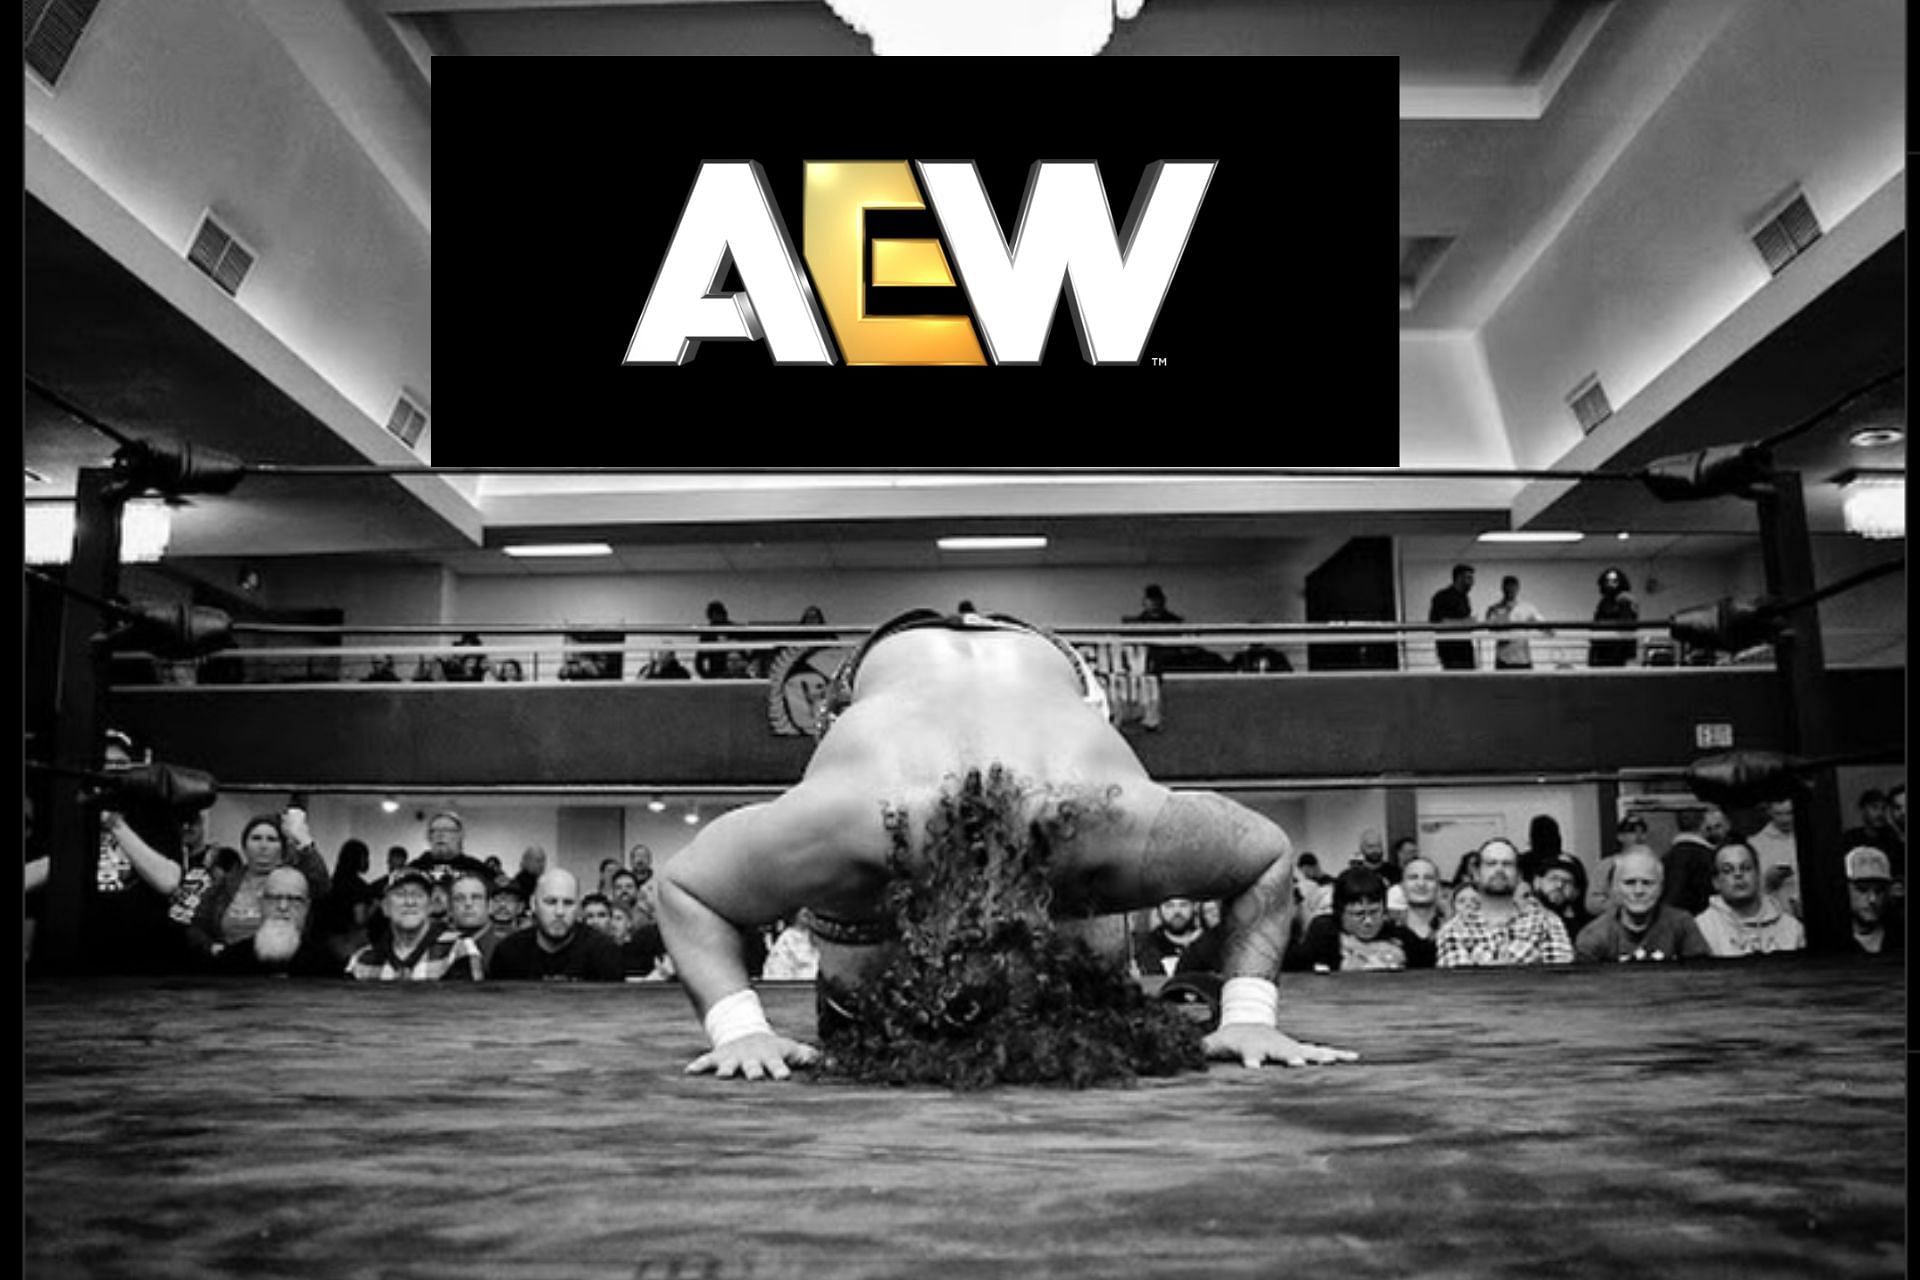 Former AEW wrestler is open for discussion about his future stint [Image Source: Santana Instagram and AEW Facebook}